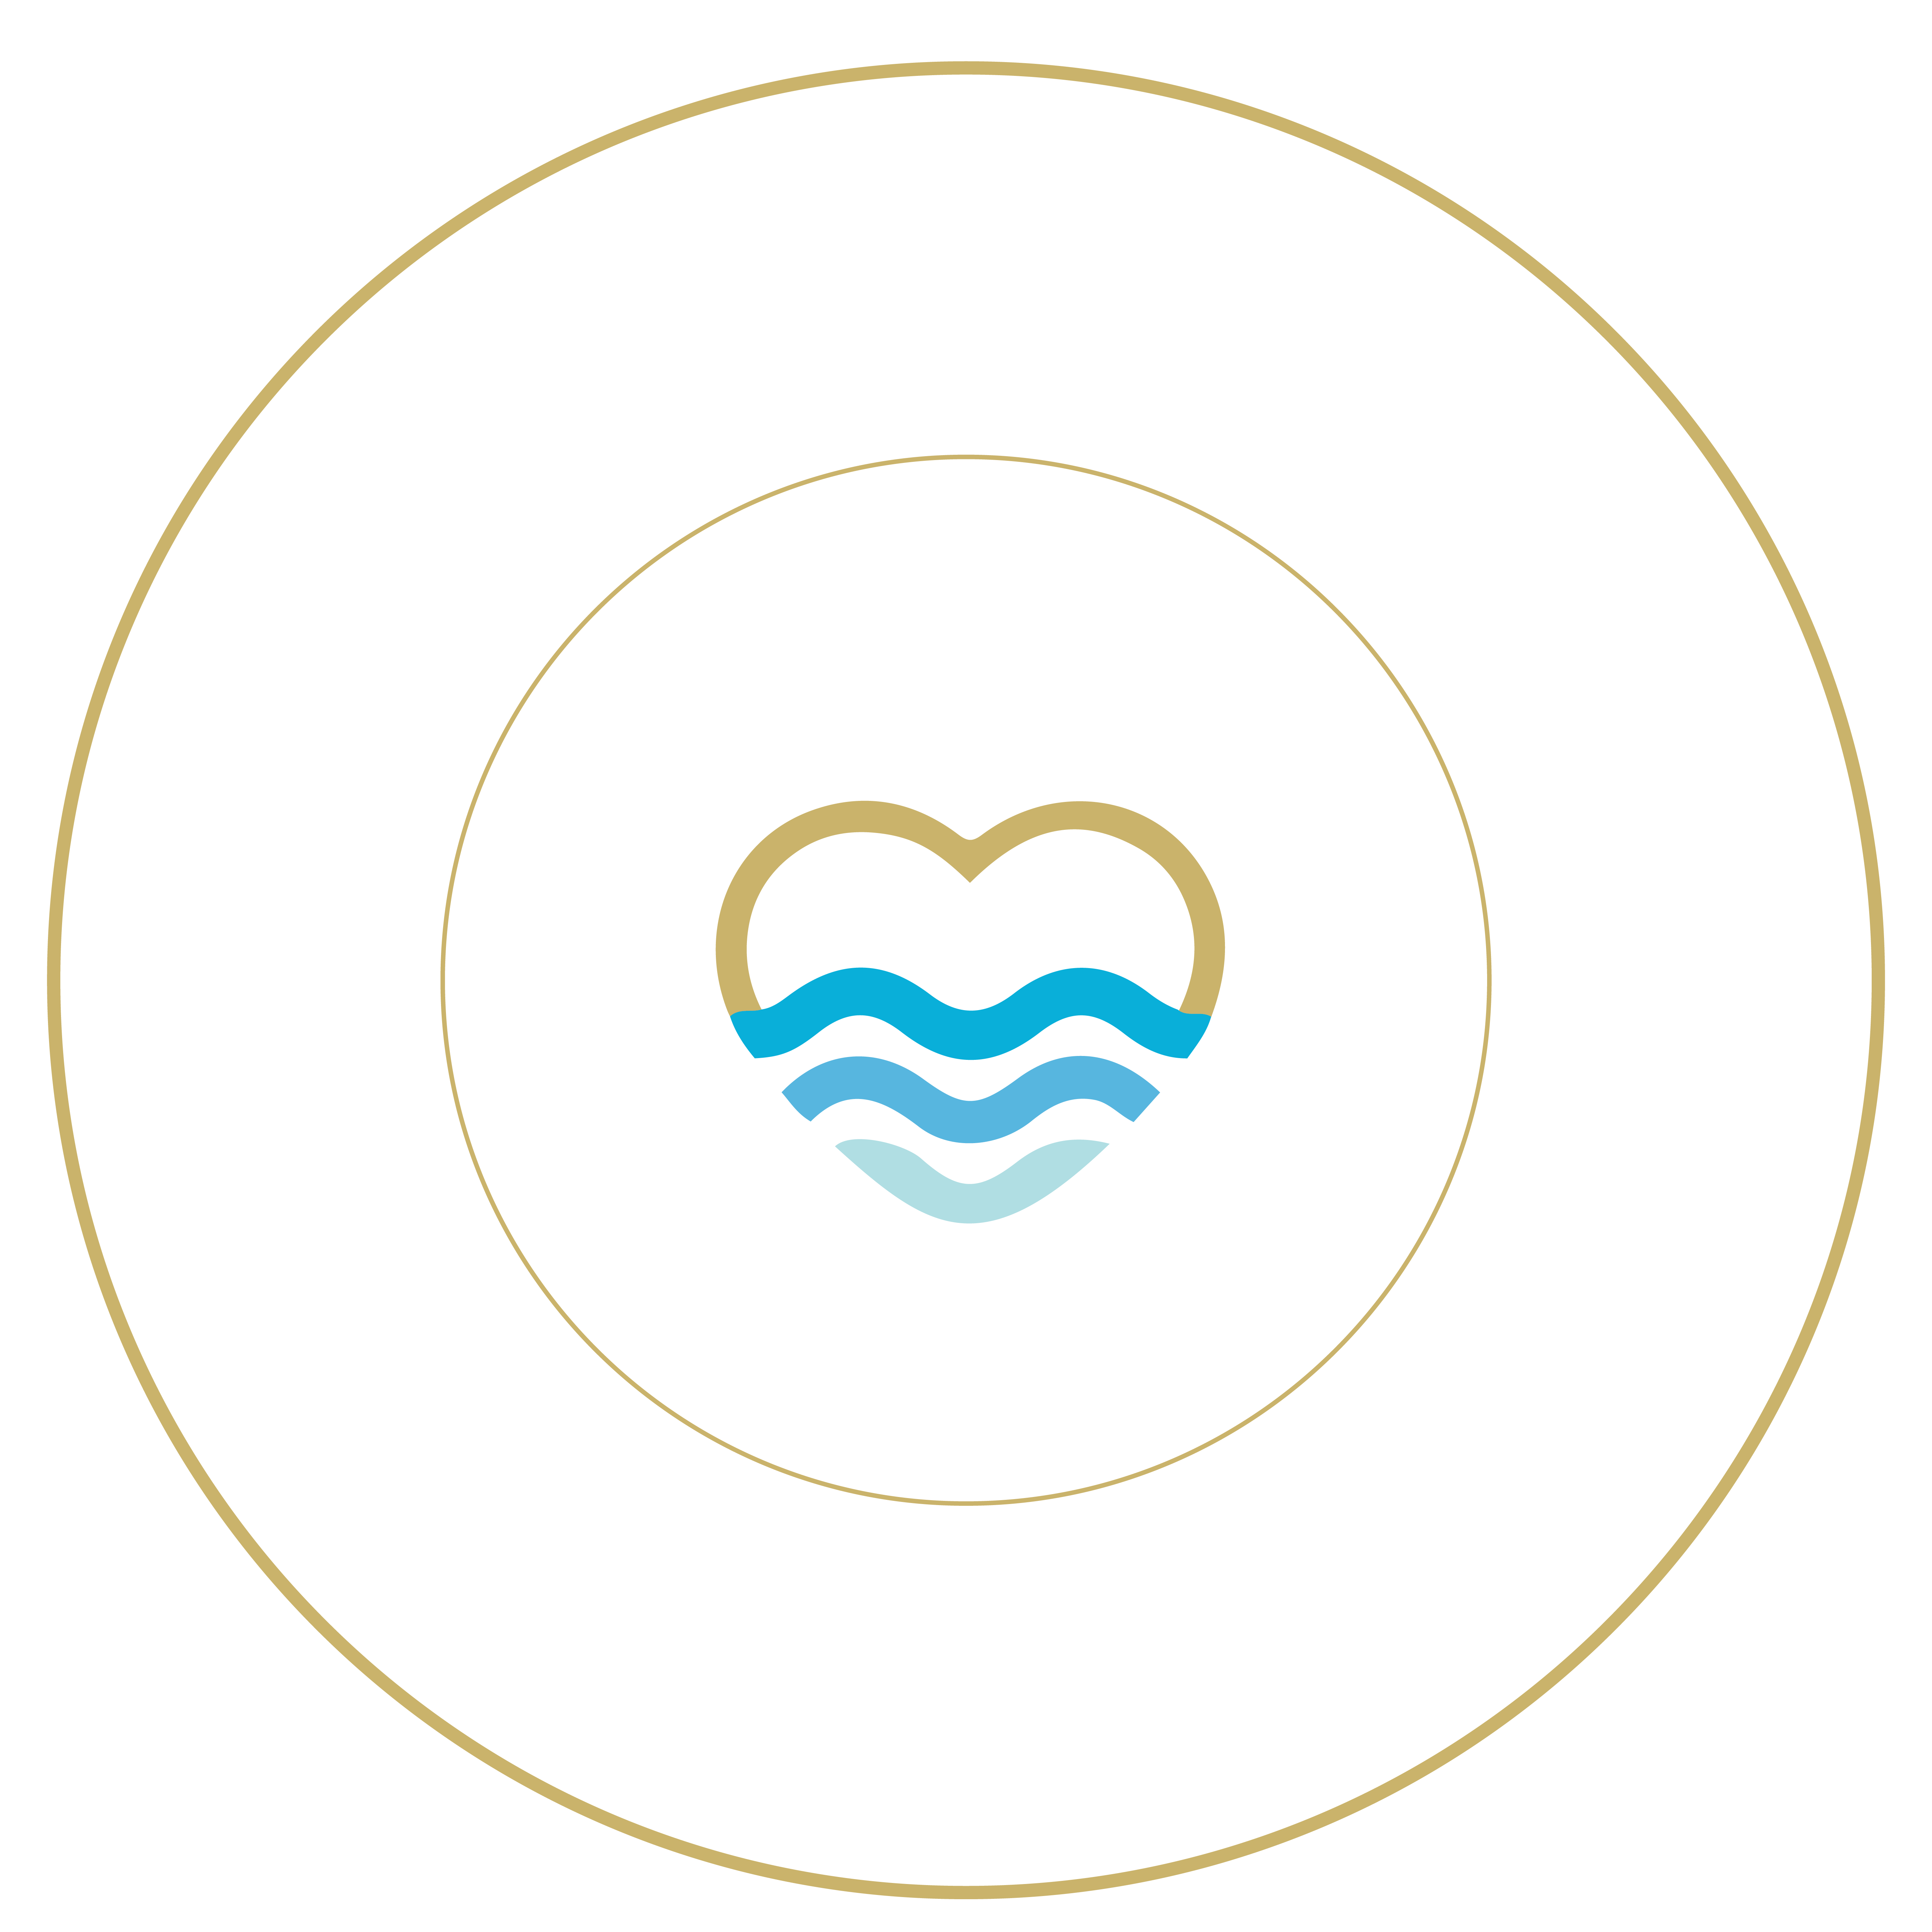 The Marriage Cruise for Christian Couples